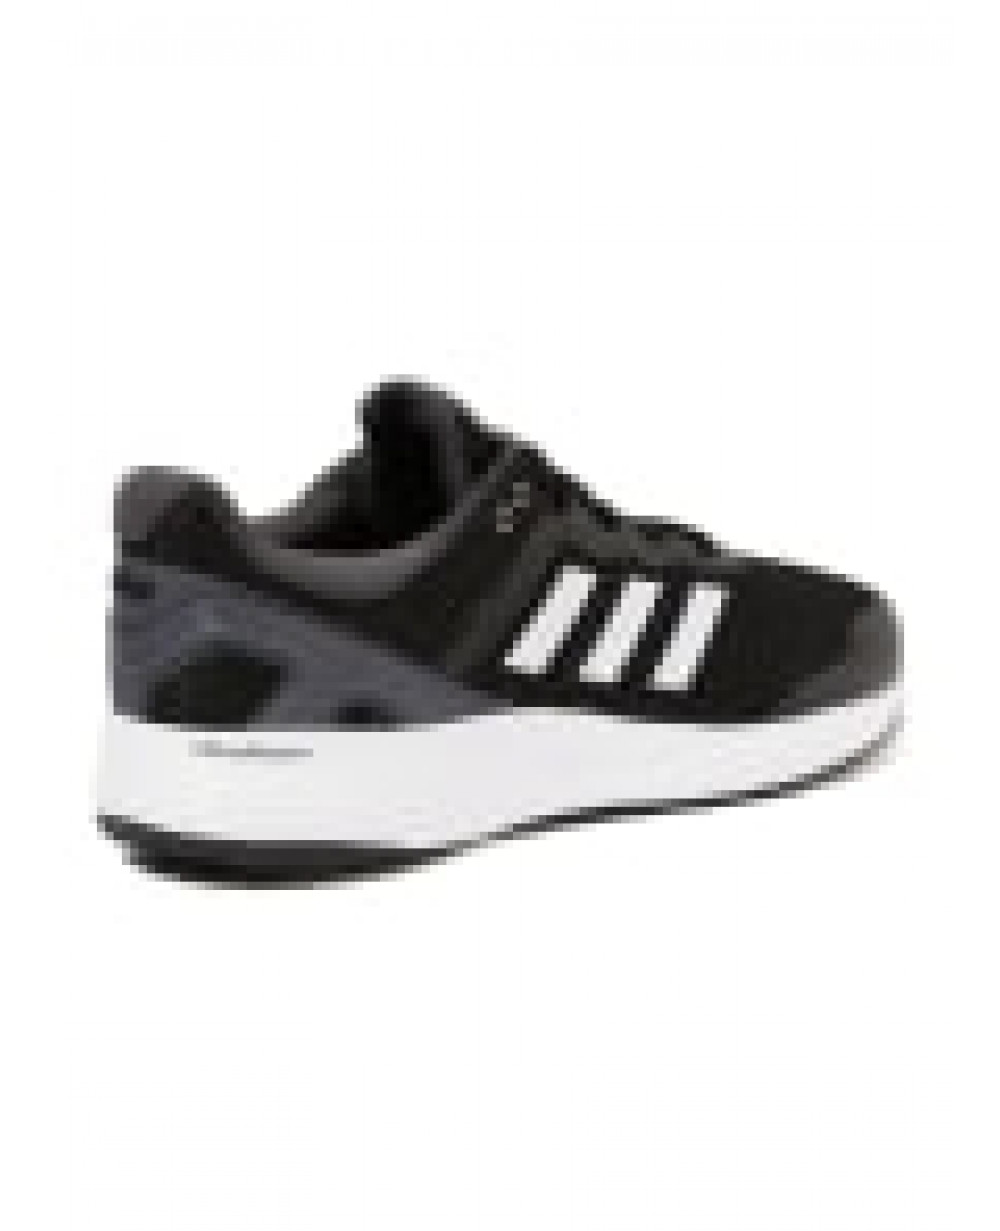 adidas climacool 5 shoes mp3